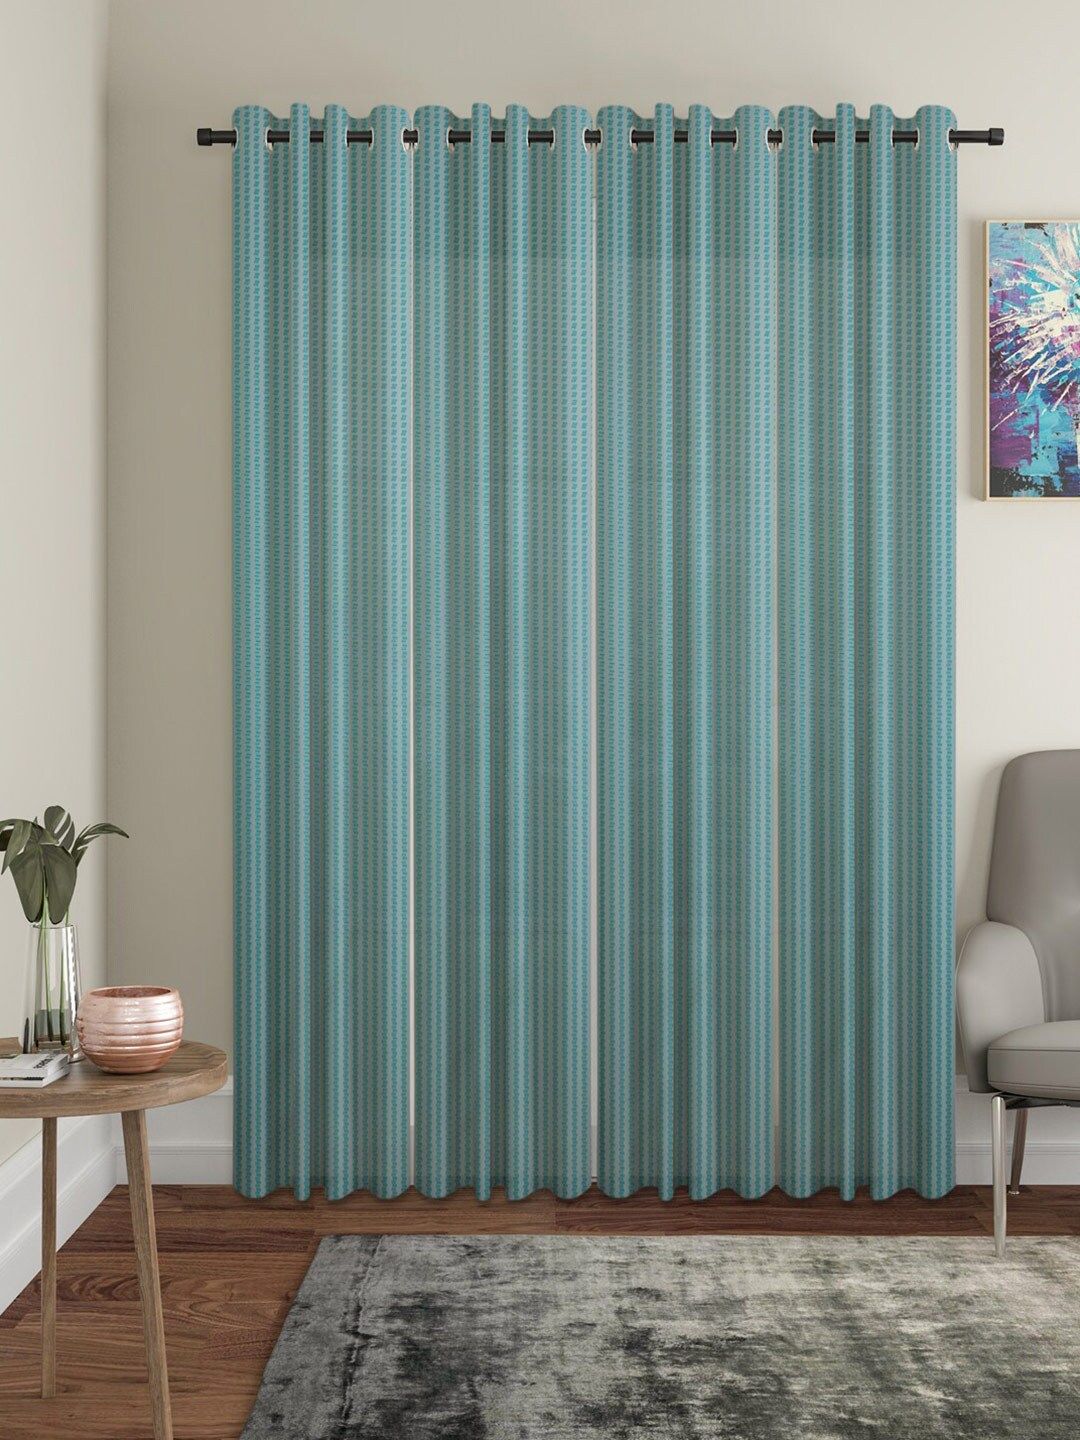 HOSTA HOMES Turquoise Blue Set of 4 Striped Door Curtain Price in India